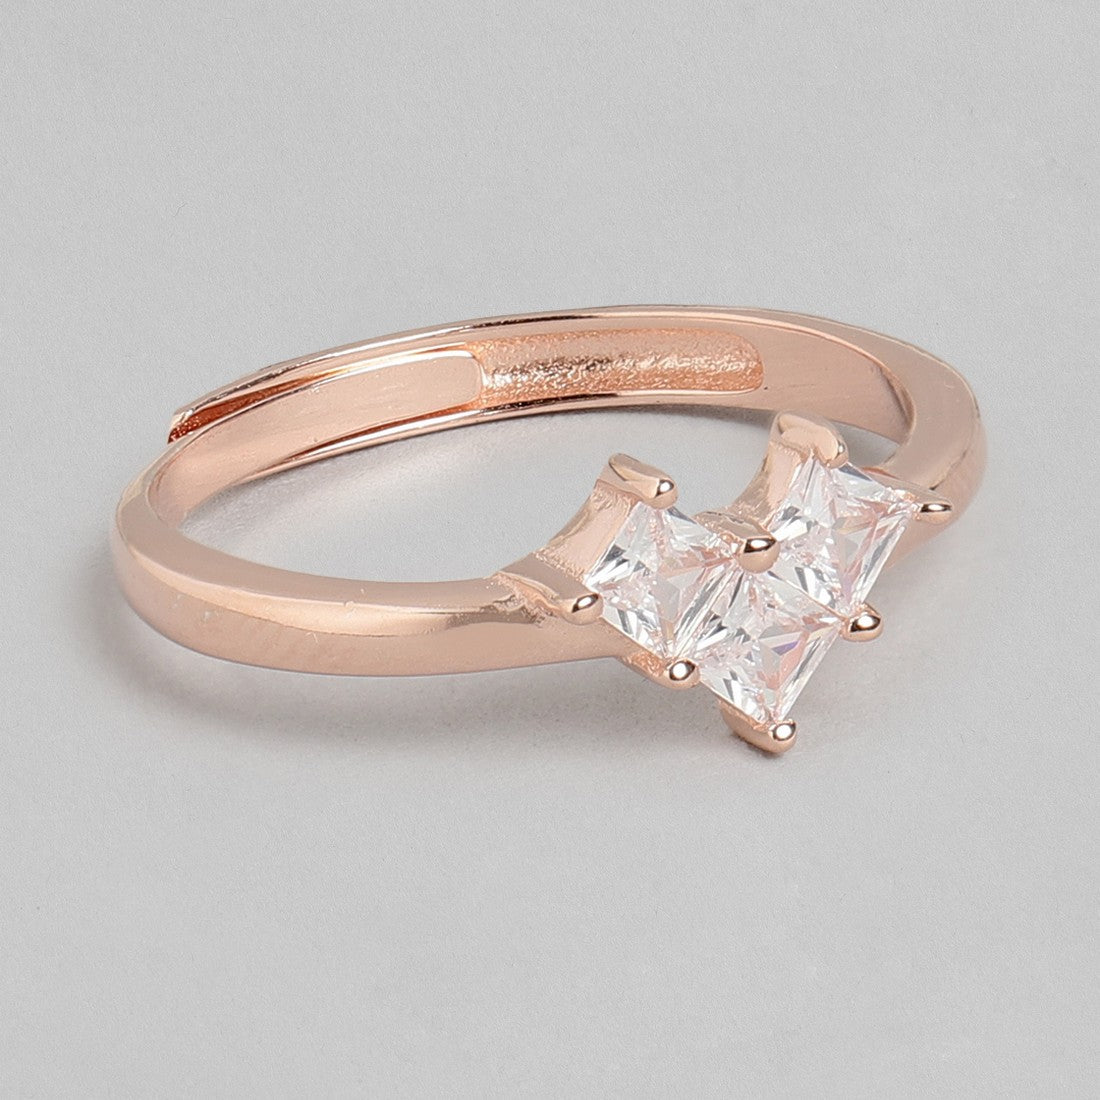 Heart Solitaire Rose Gold-Plated 925 Sterling Silver Jewellery Set